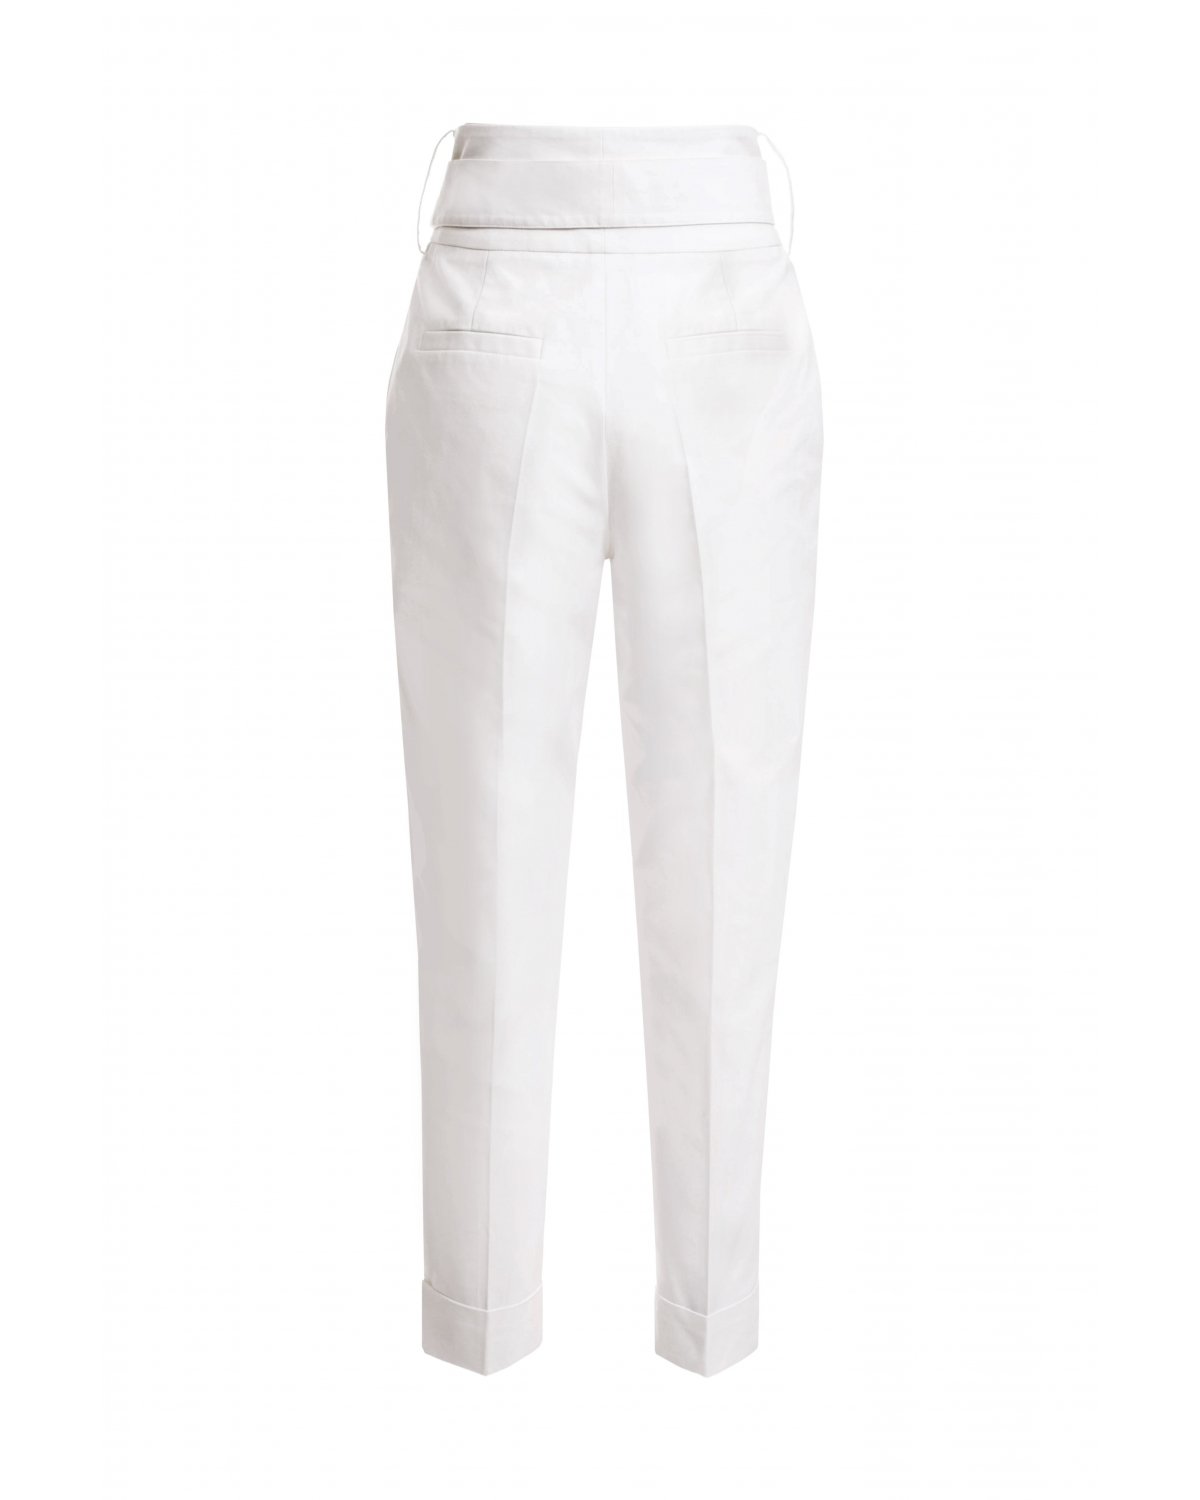 High-waisted belted white pants | | Genny